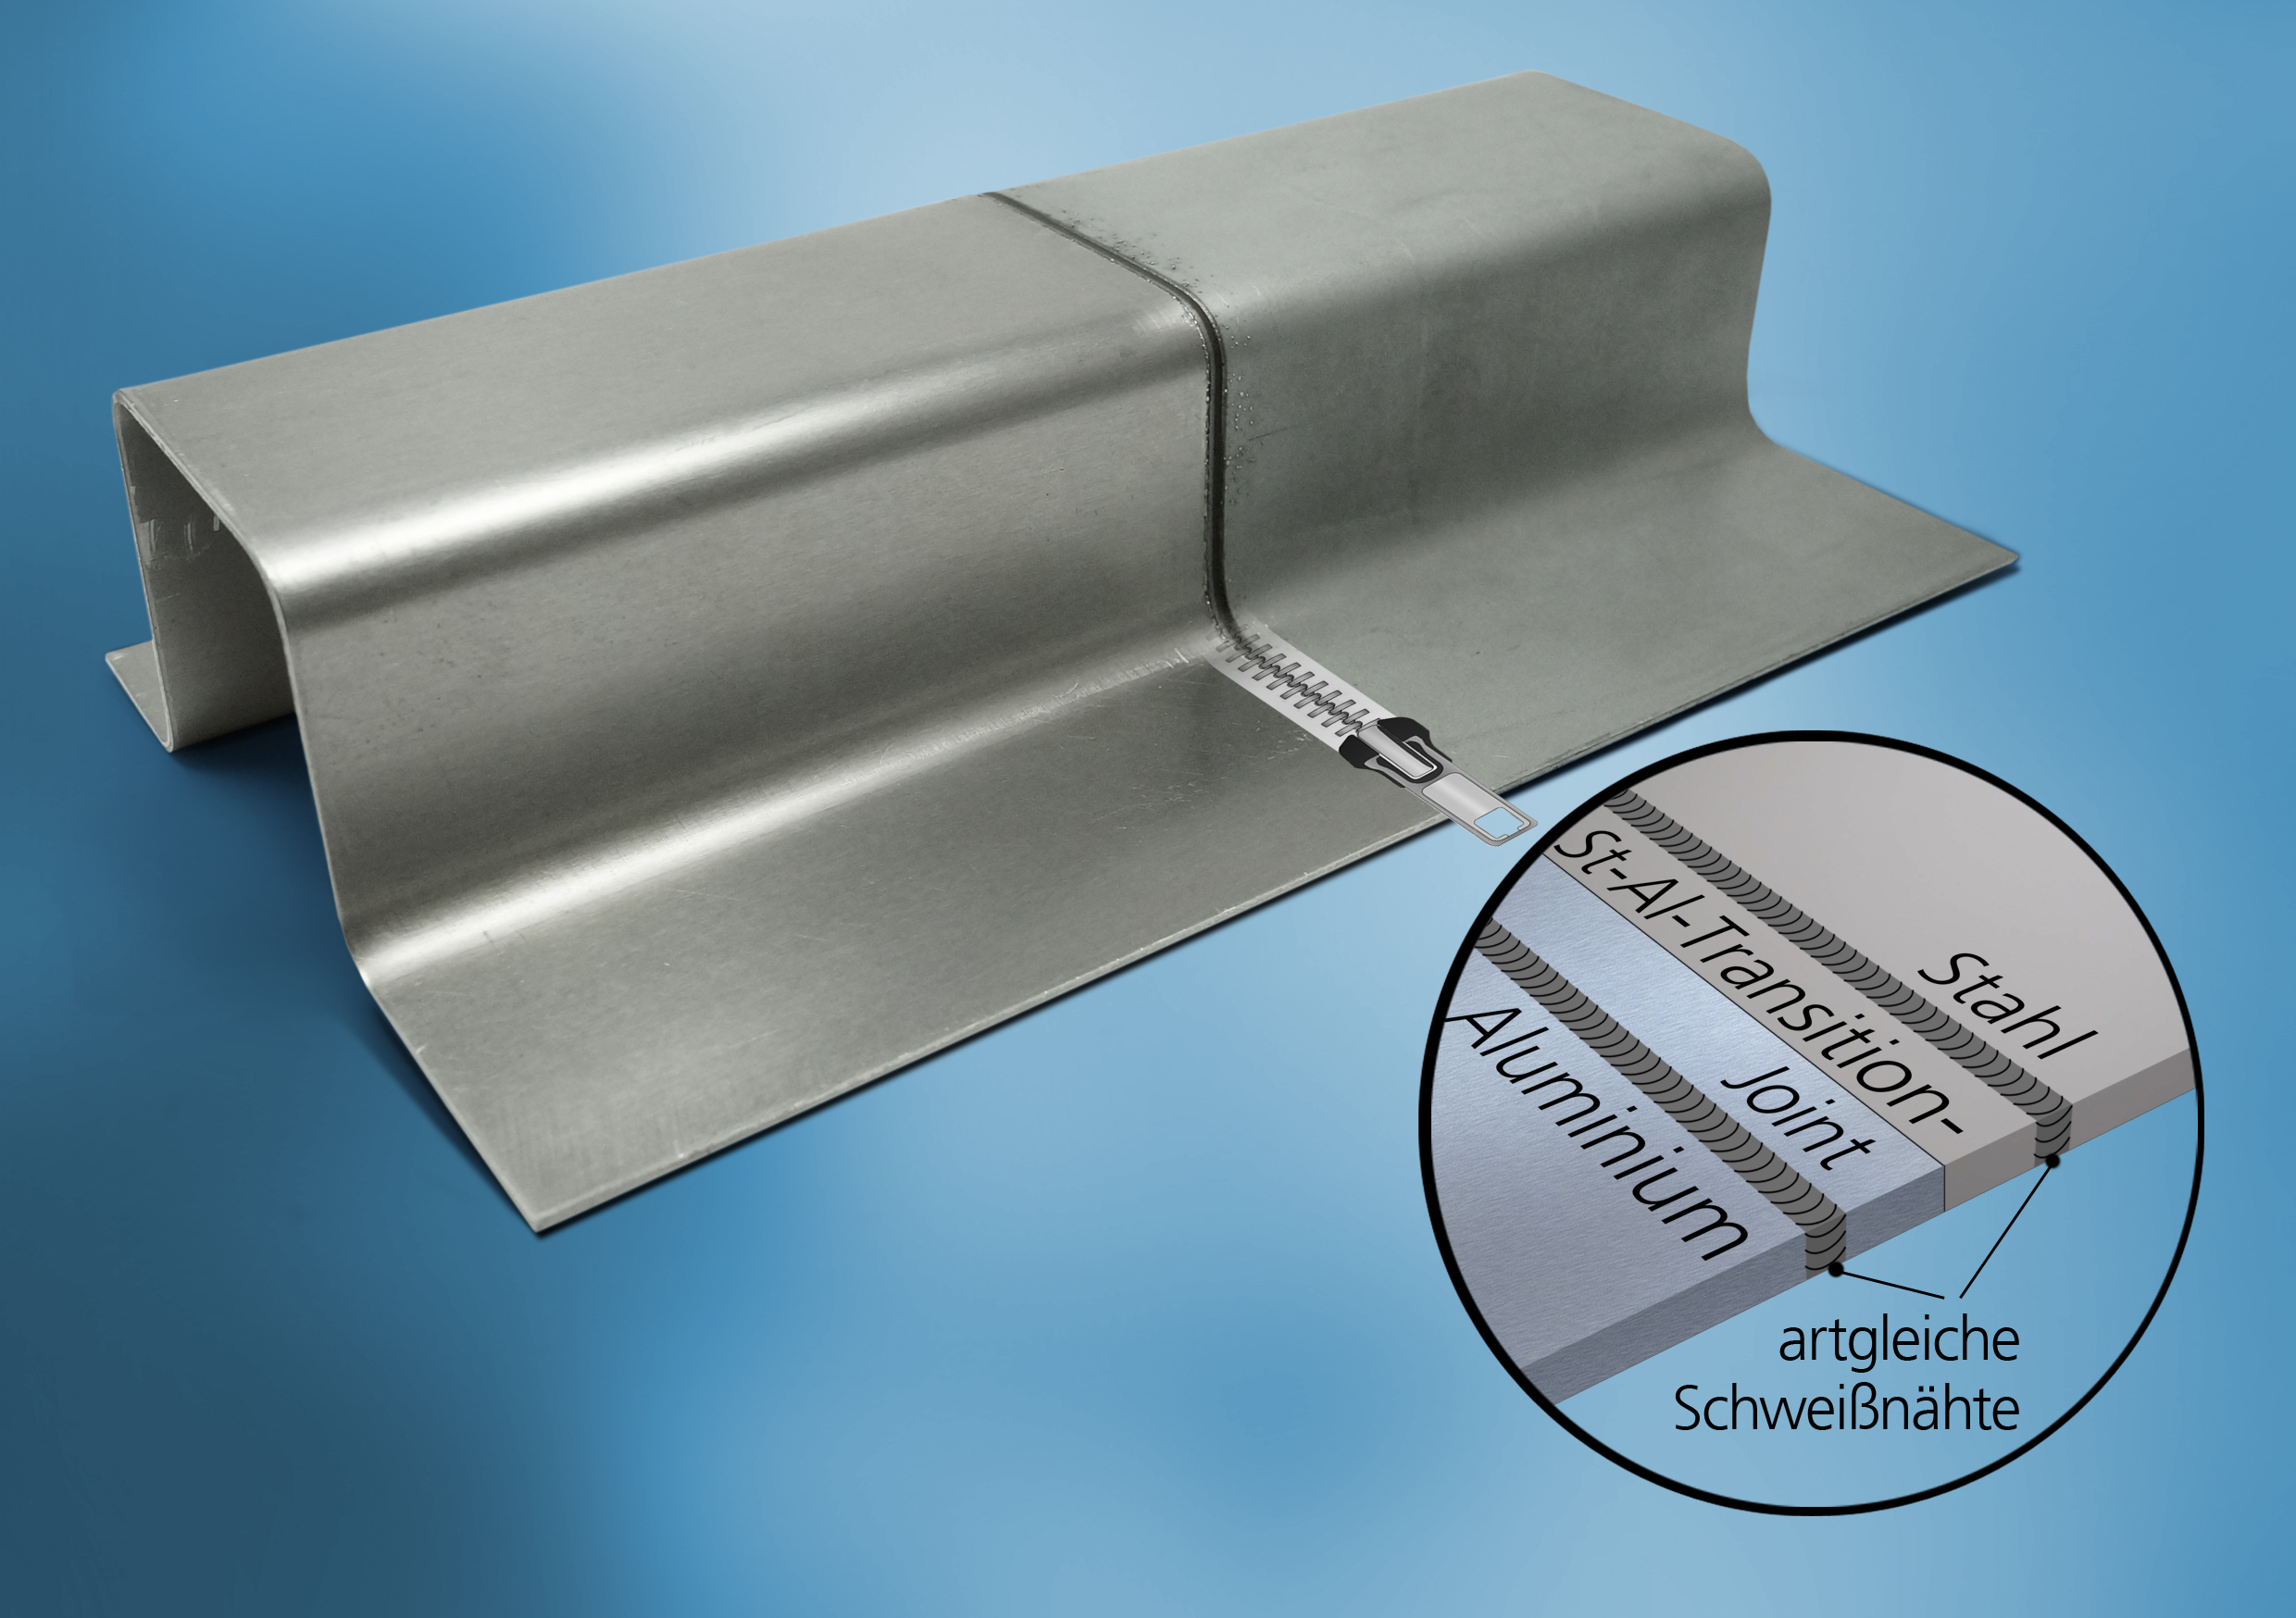 Bended plate in steel-aluminum-mix design, joined with transition joint